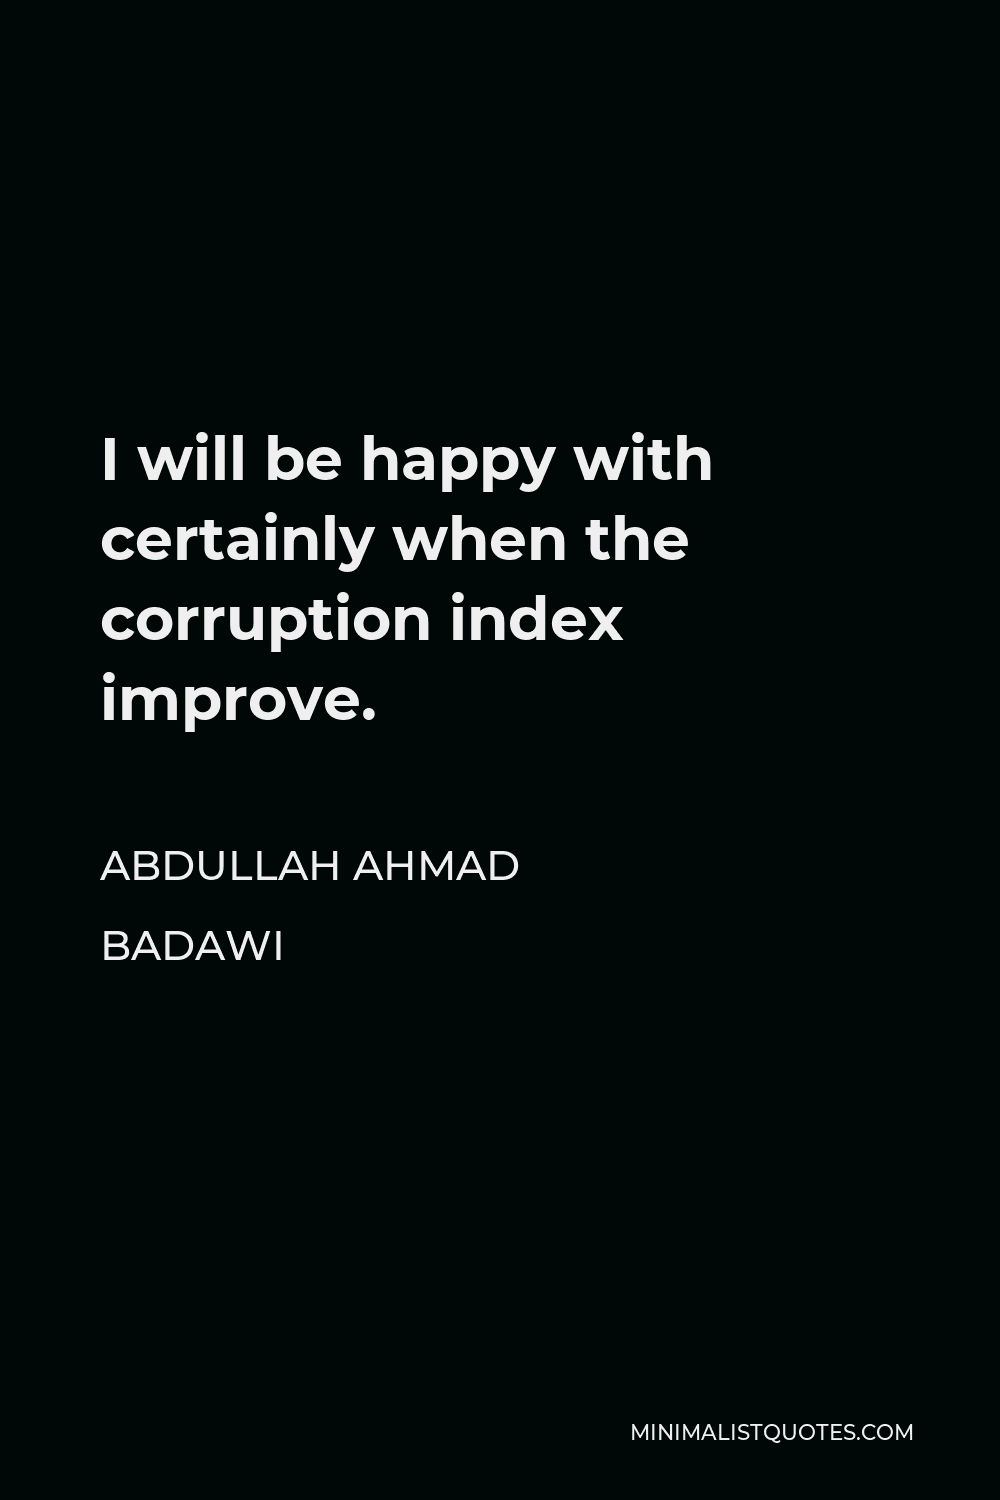 Abdullah Ahmad Badawi Quote - I will be happy with certainly when the corruption index improve.